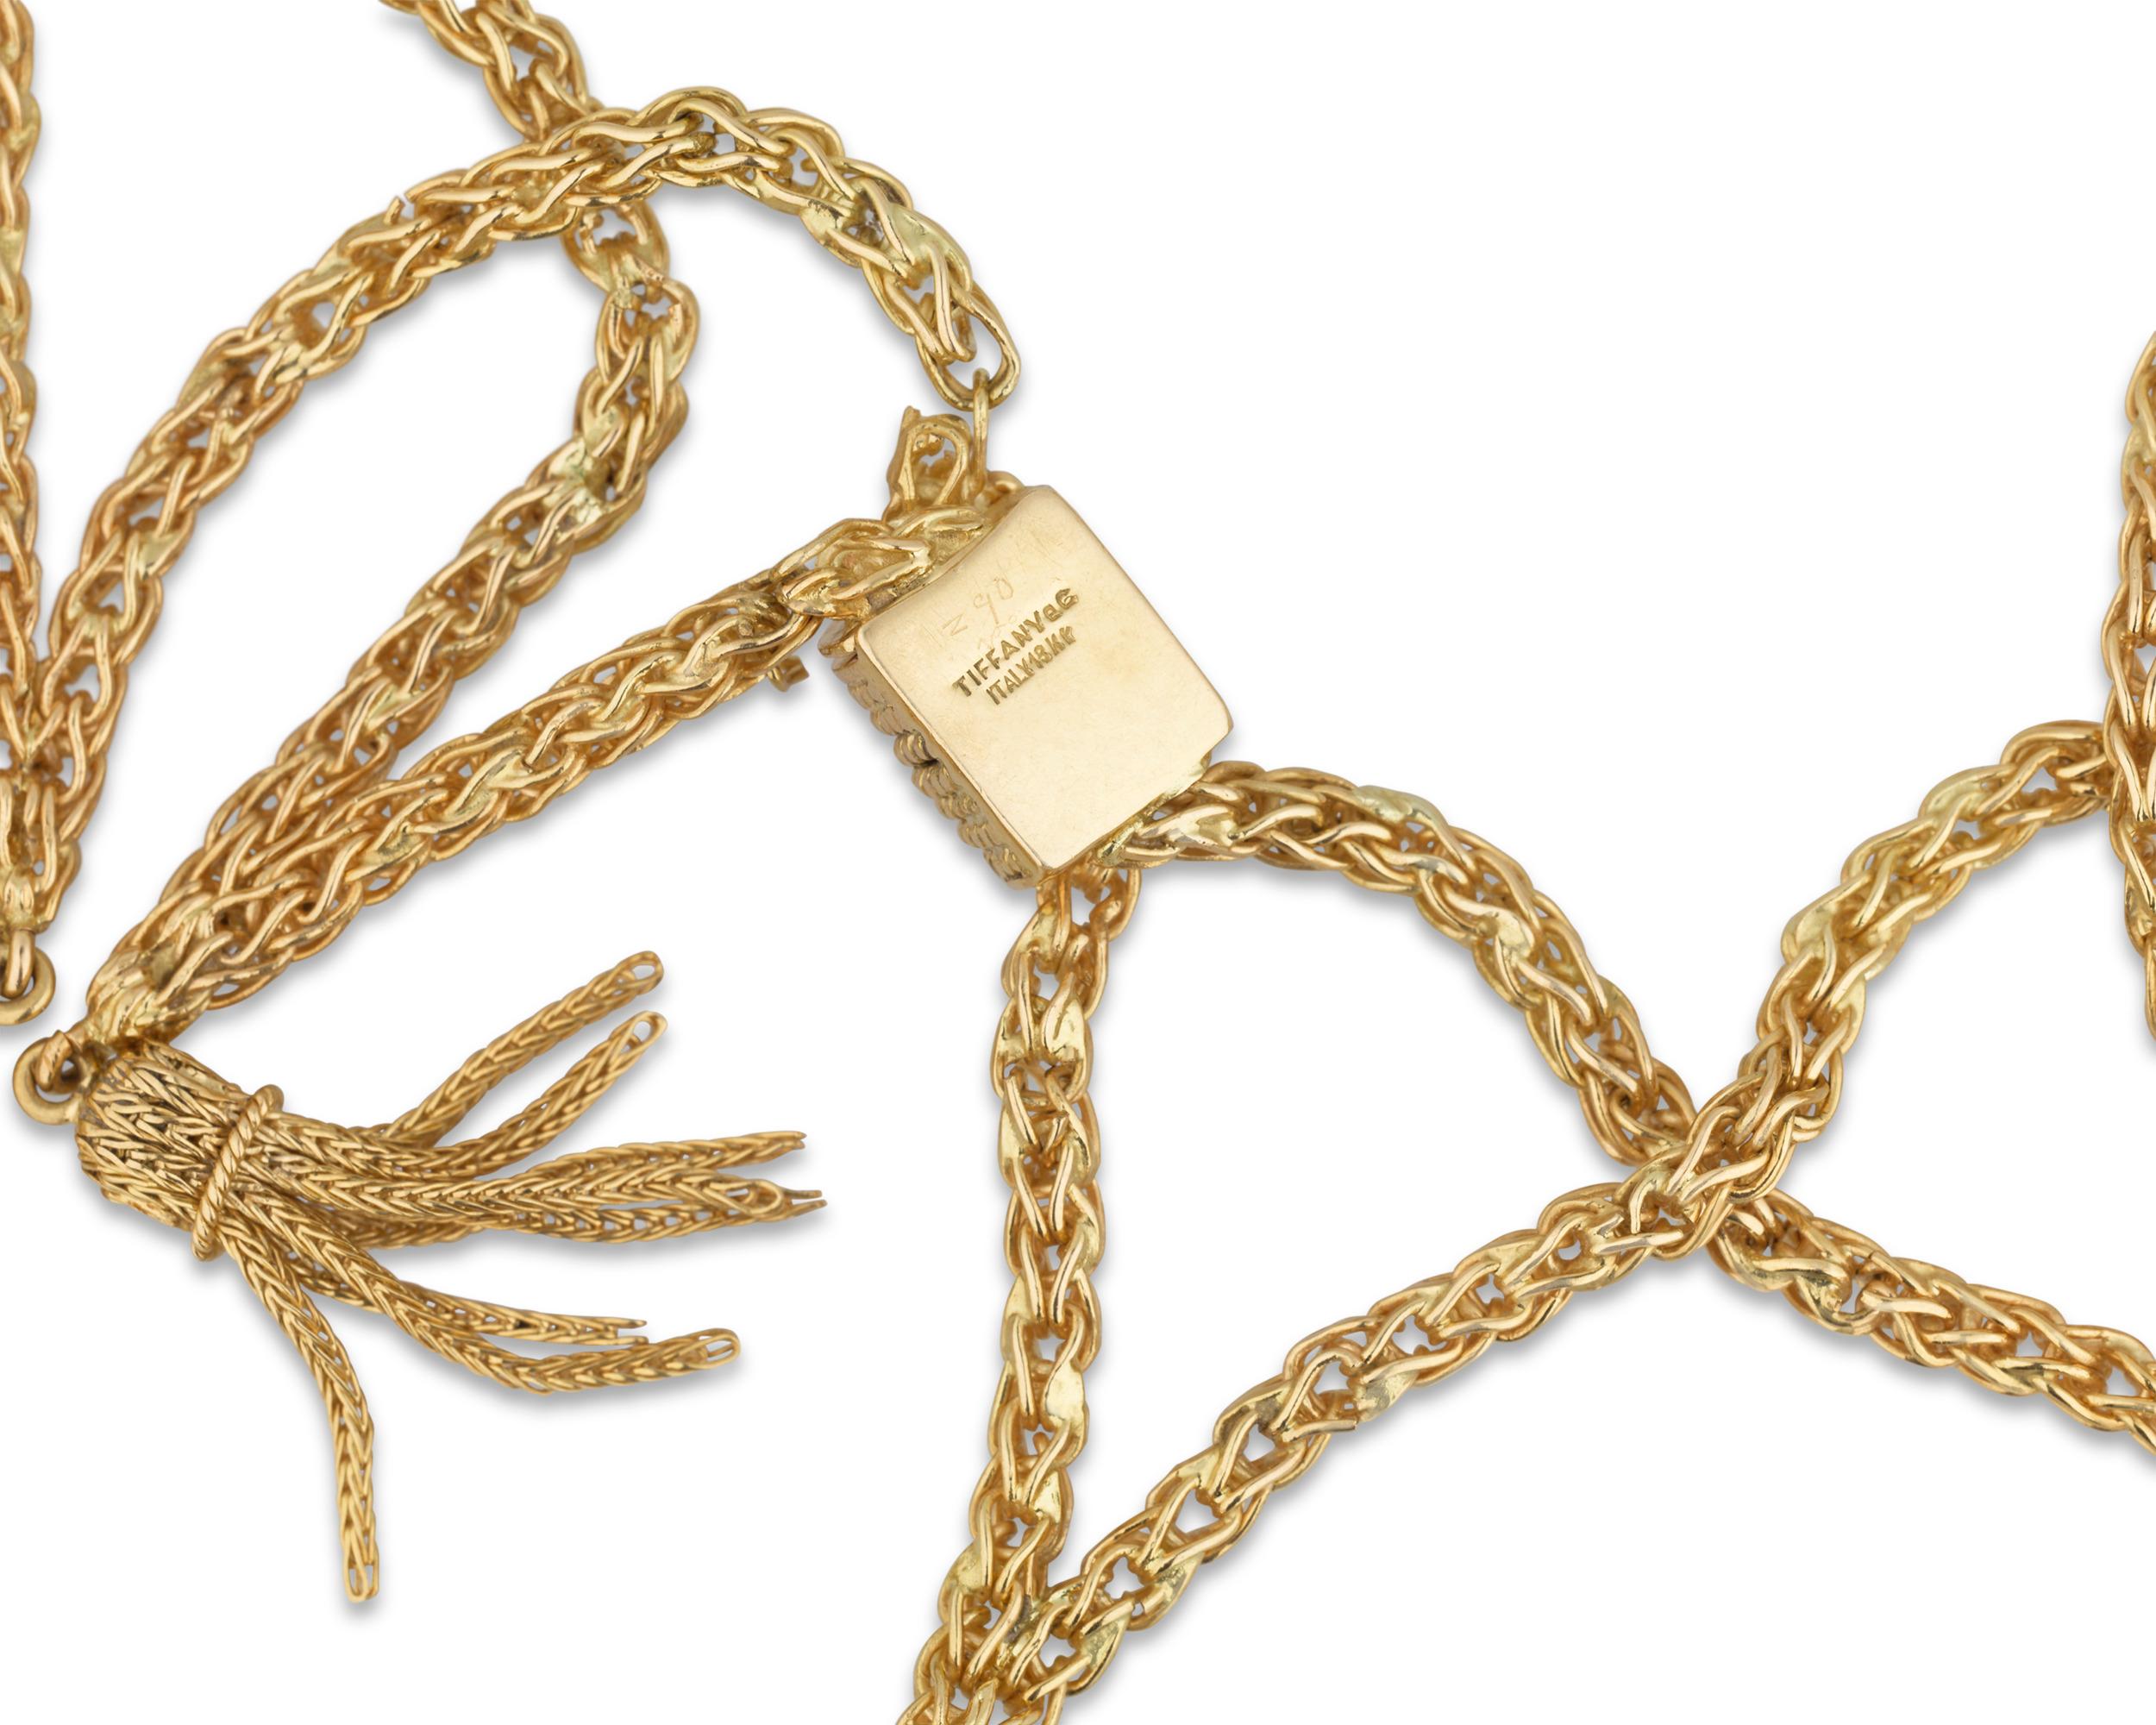 Chic 18K yellow gold tassels hang from a gold chain for a dynamic, contemporary look from the famed Tiffany & Co. This necklace exhibits a lace-like delicacy thanks to its overlapping structure, translating an organic sensuality into an iconic piece